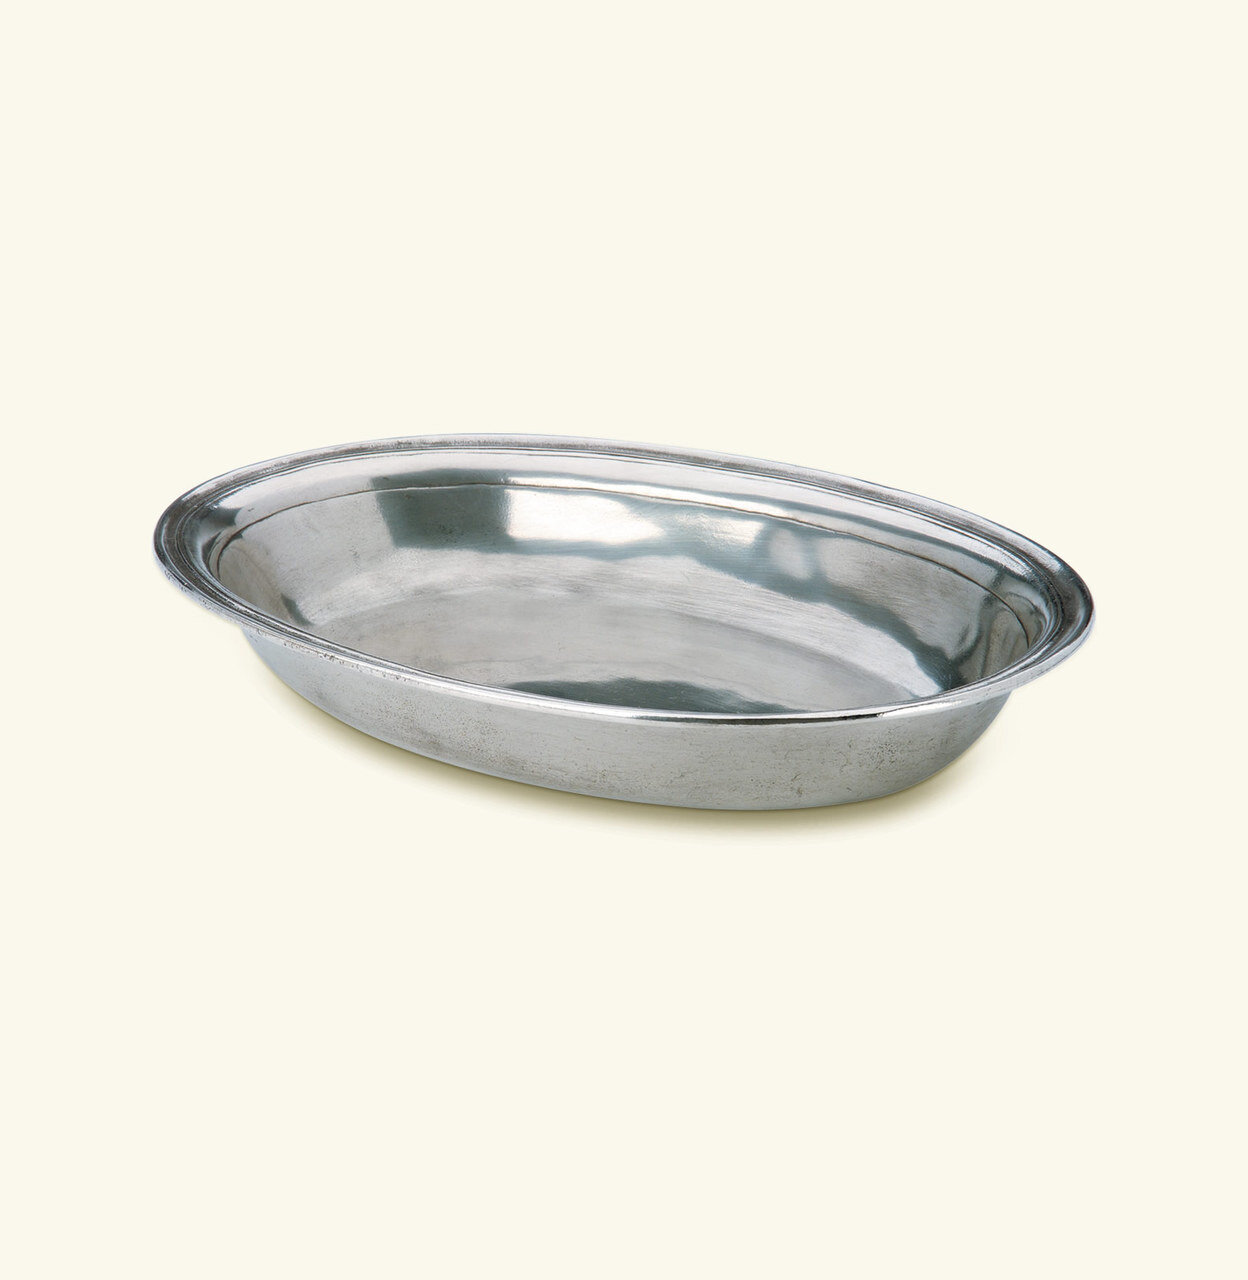 Match Pewter Oval Serving Bowl 1016